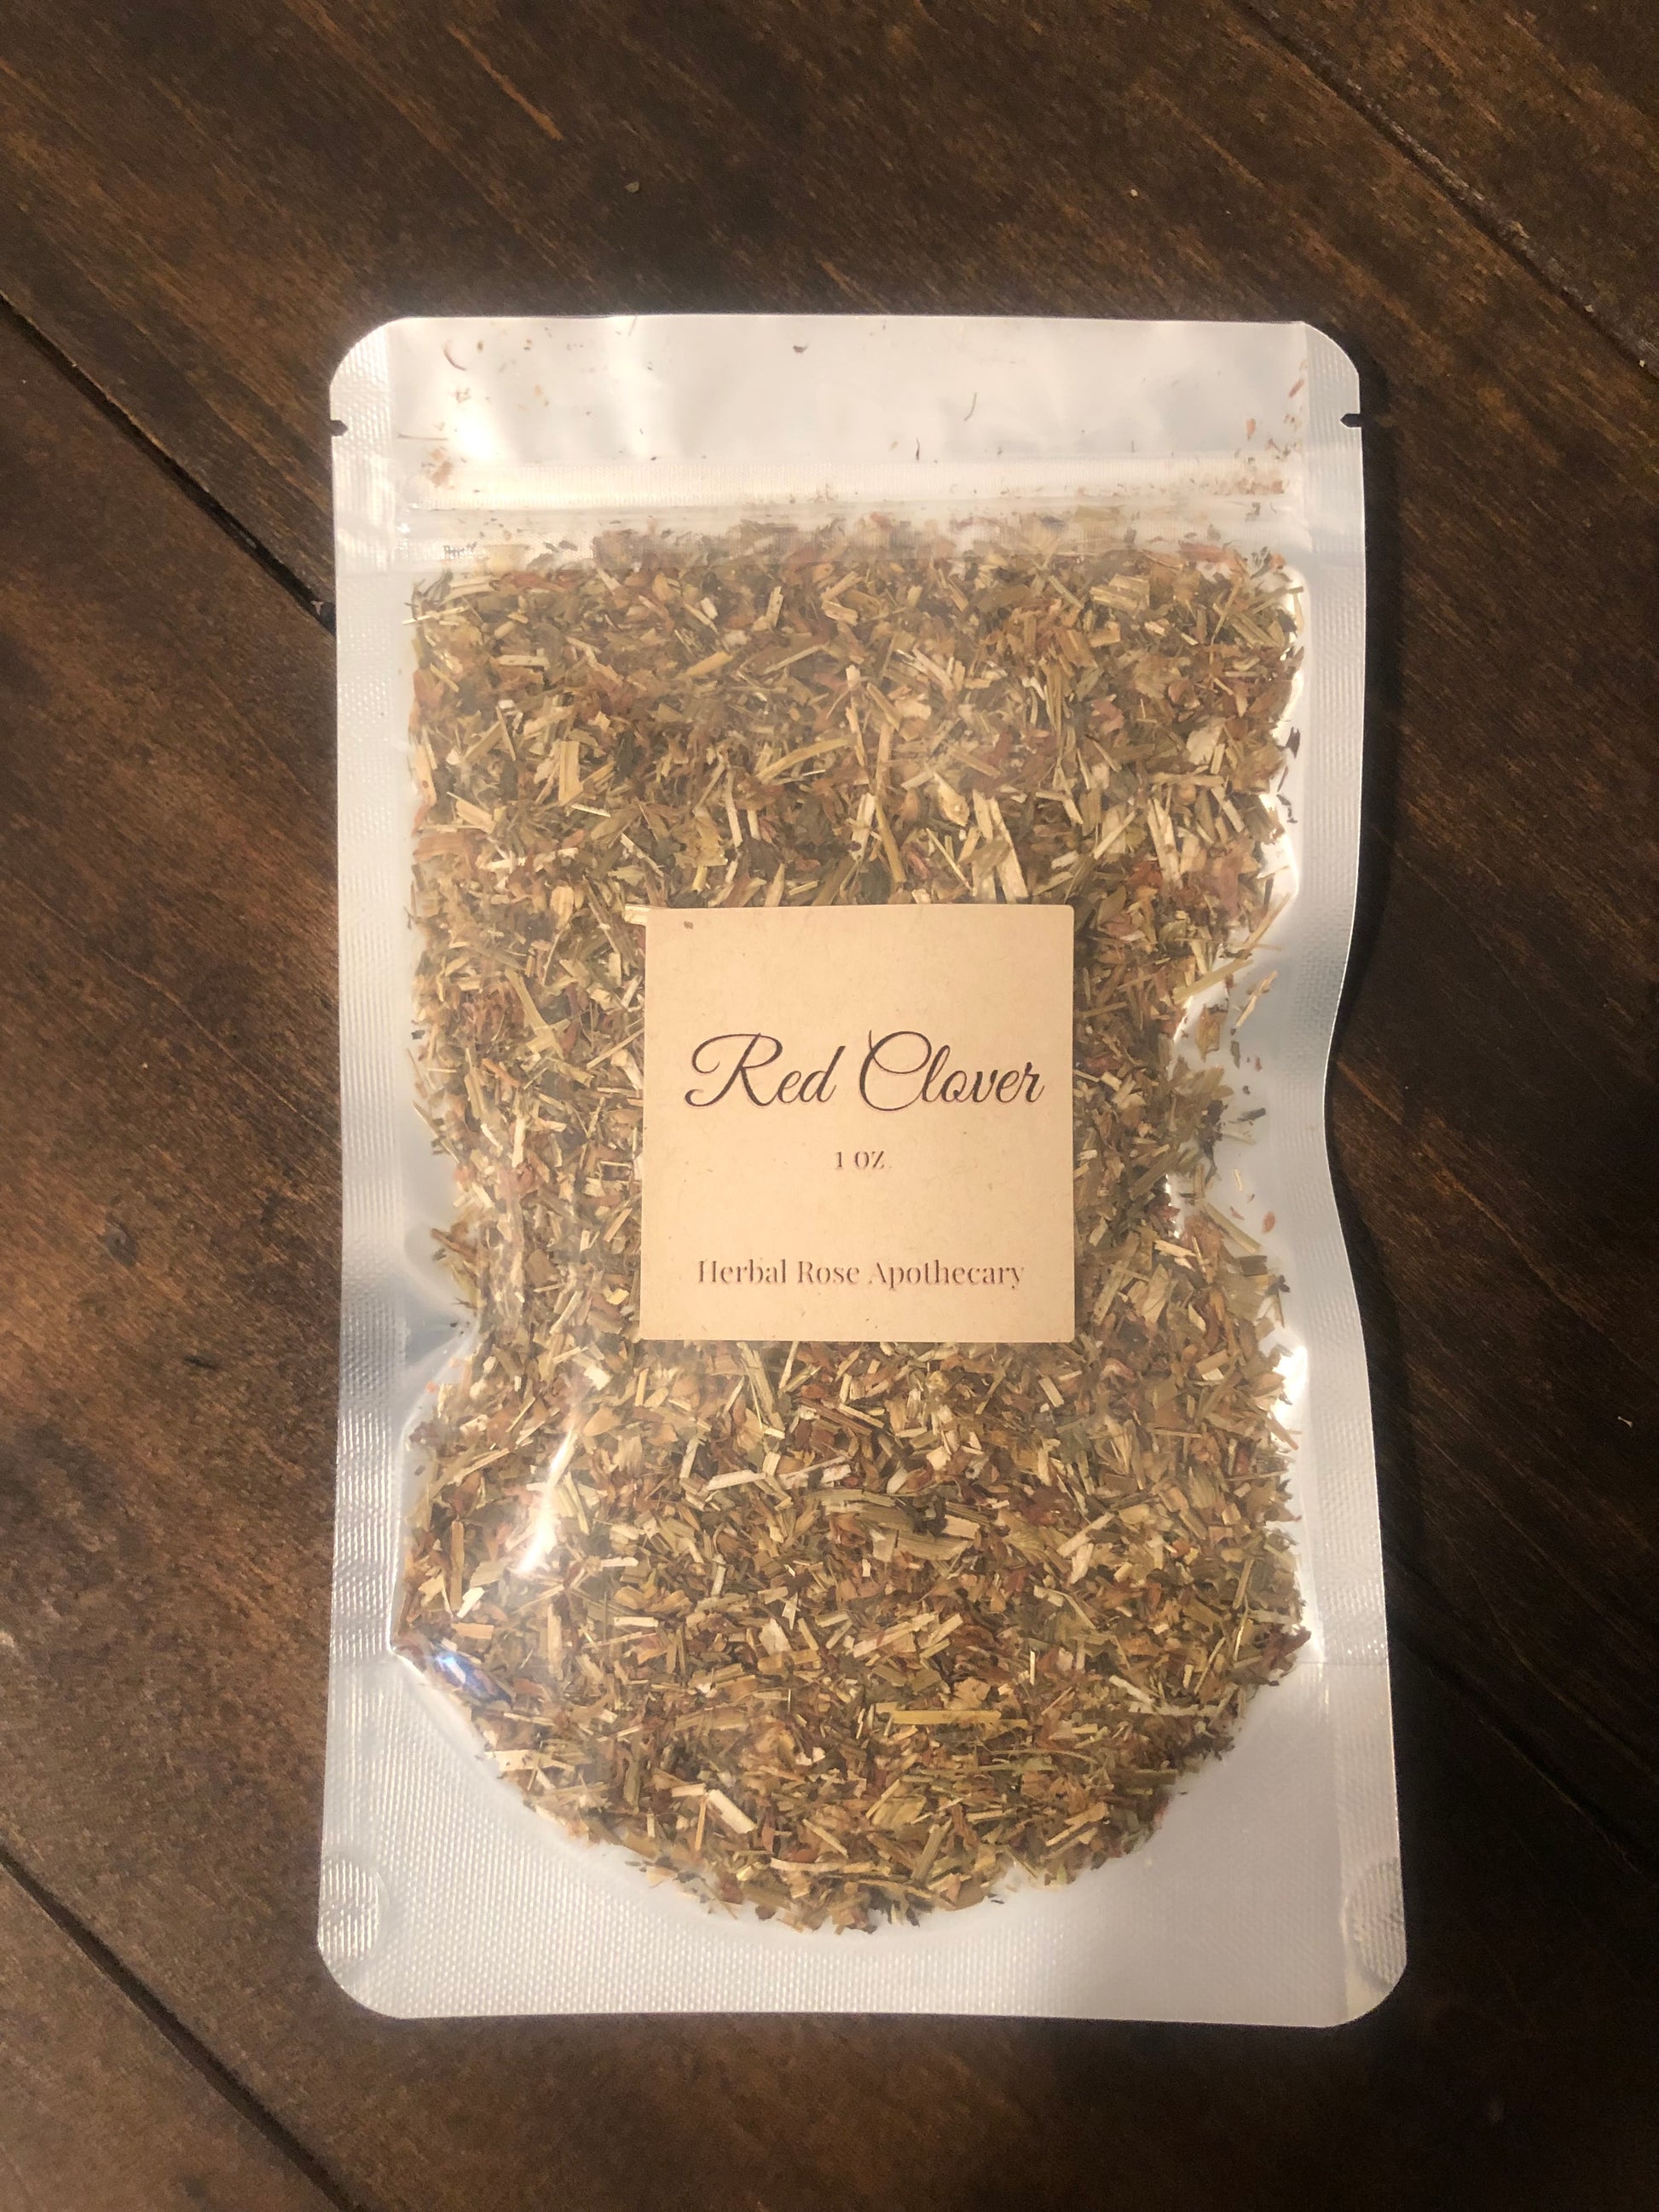 red clover 1oz in clear bag on wooden background